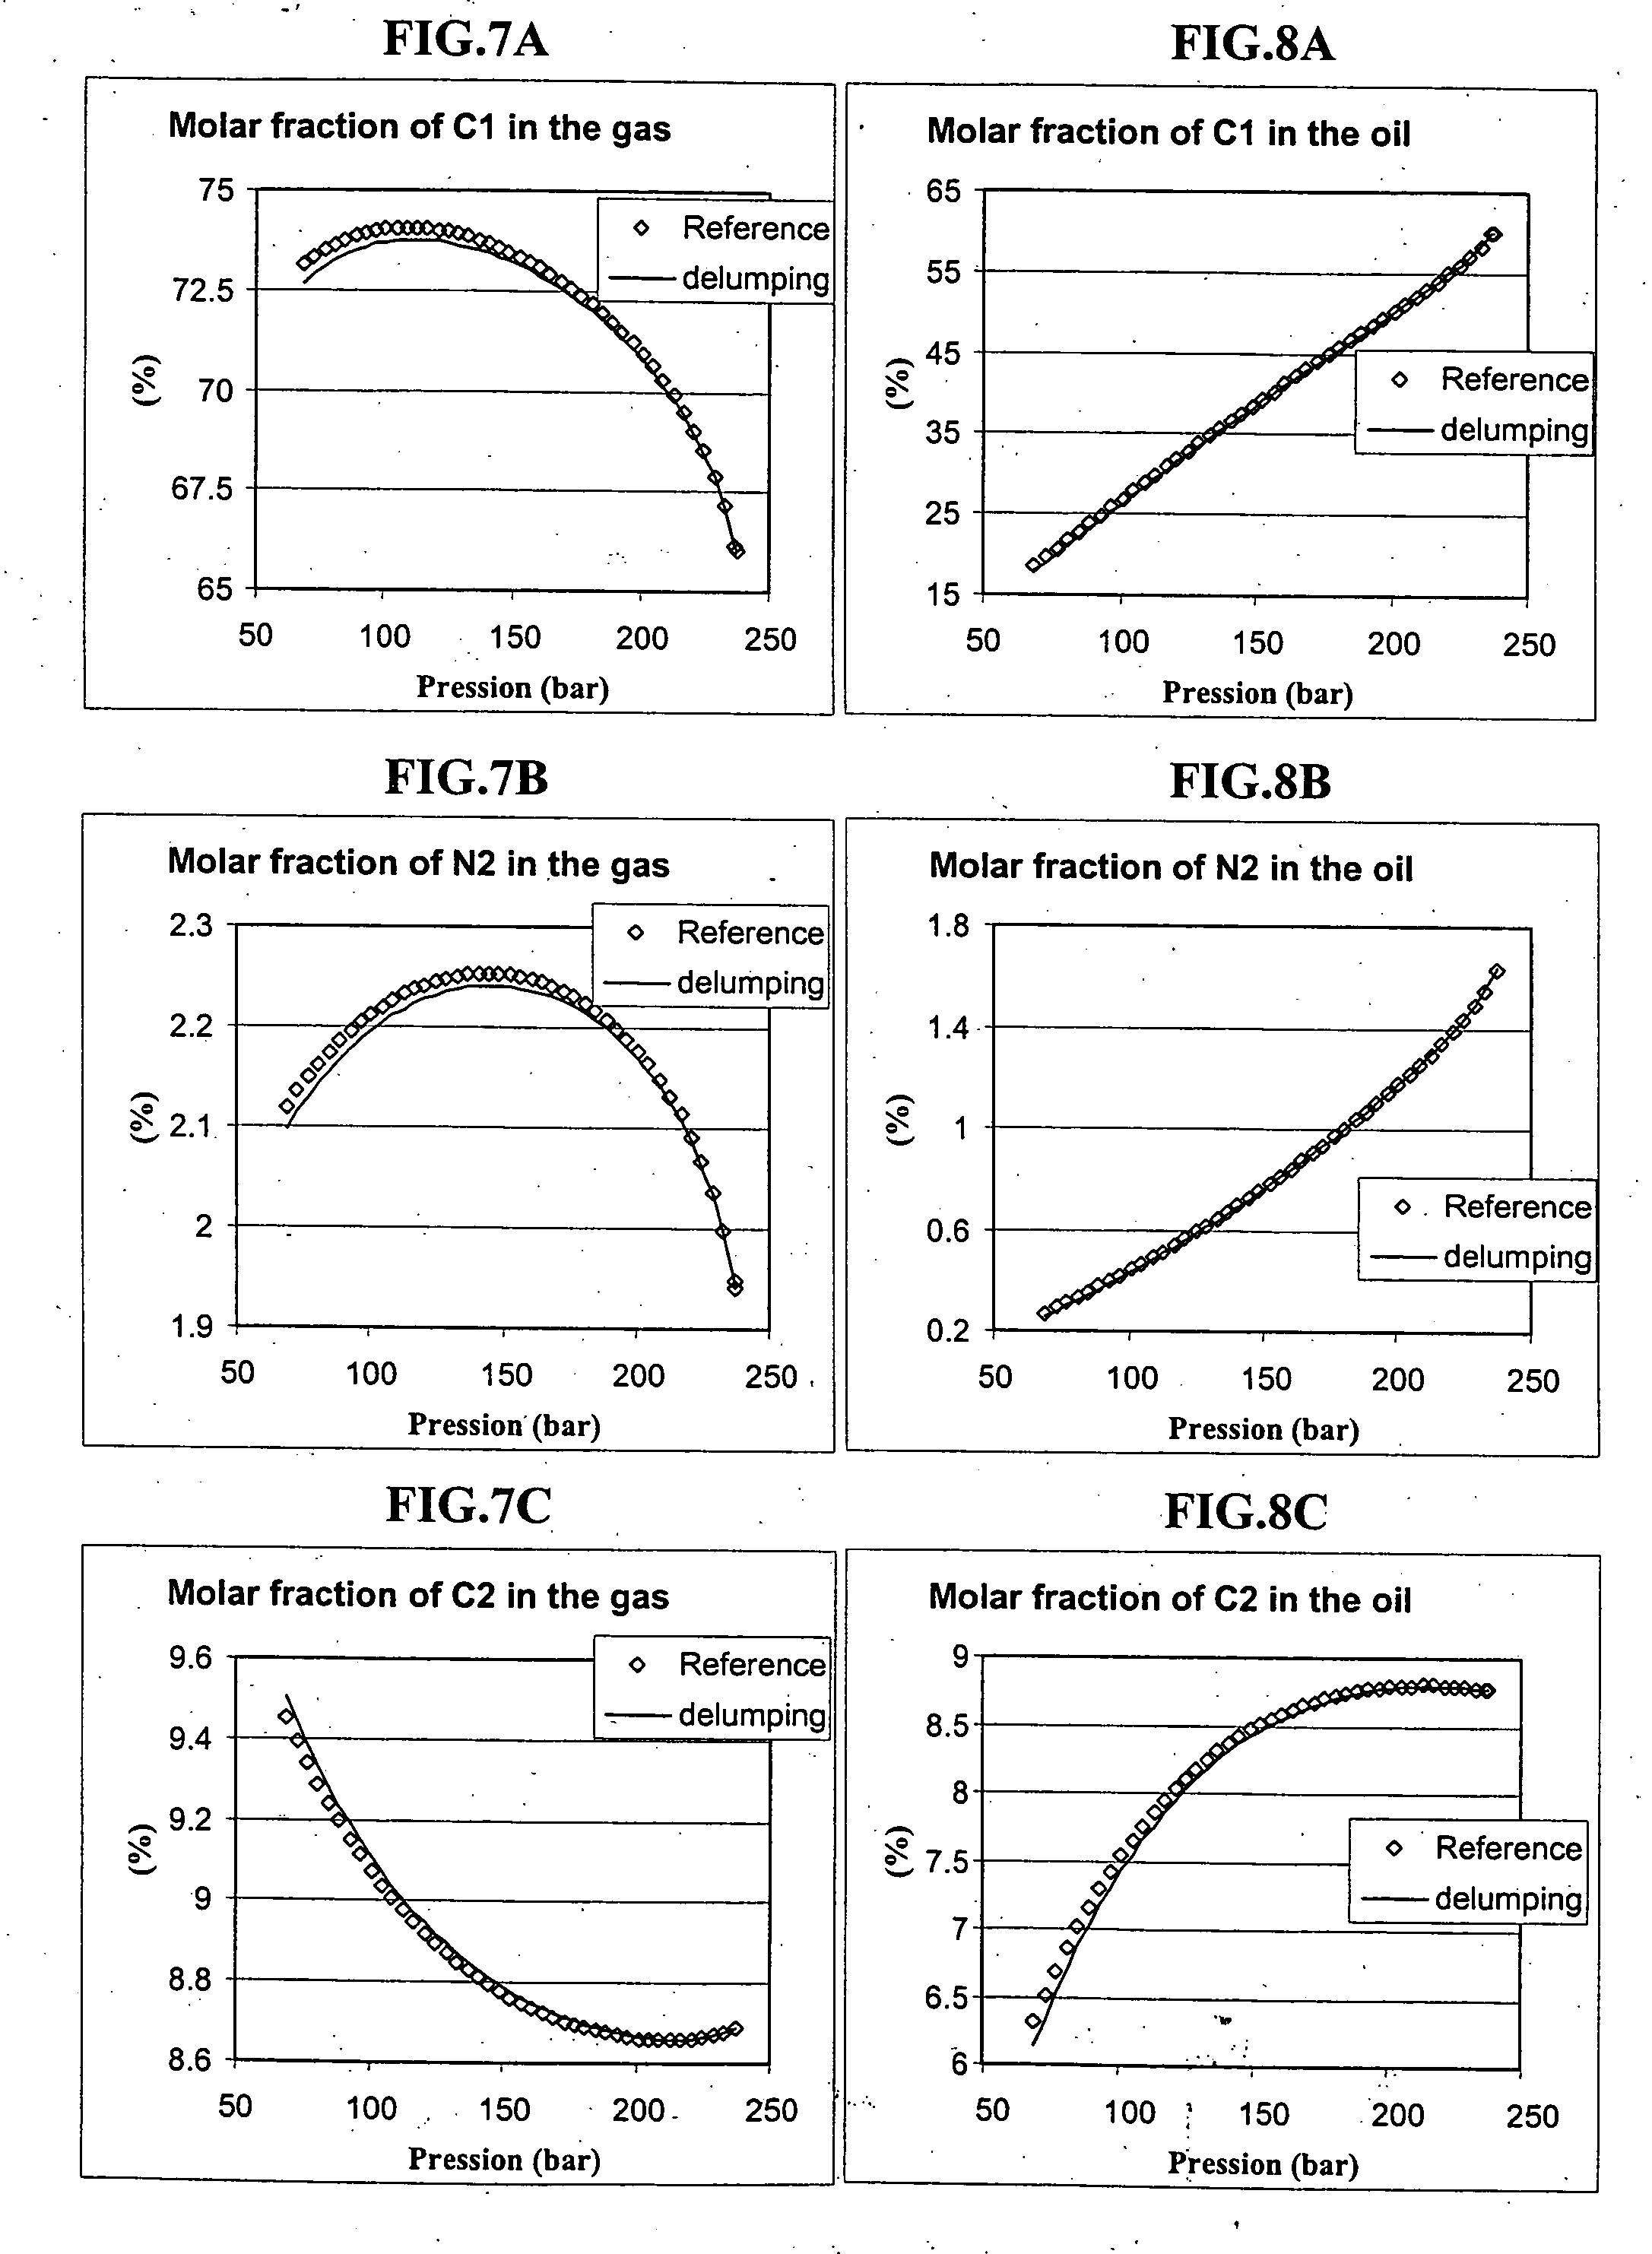 Lumping and delumping method for describing hydrocarbon-containing fluids